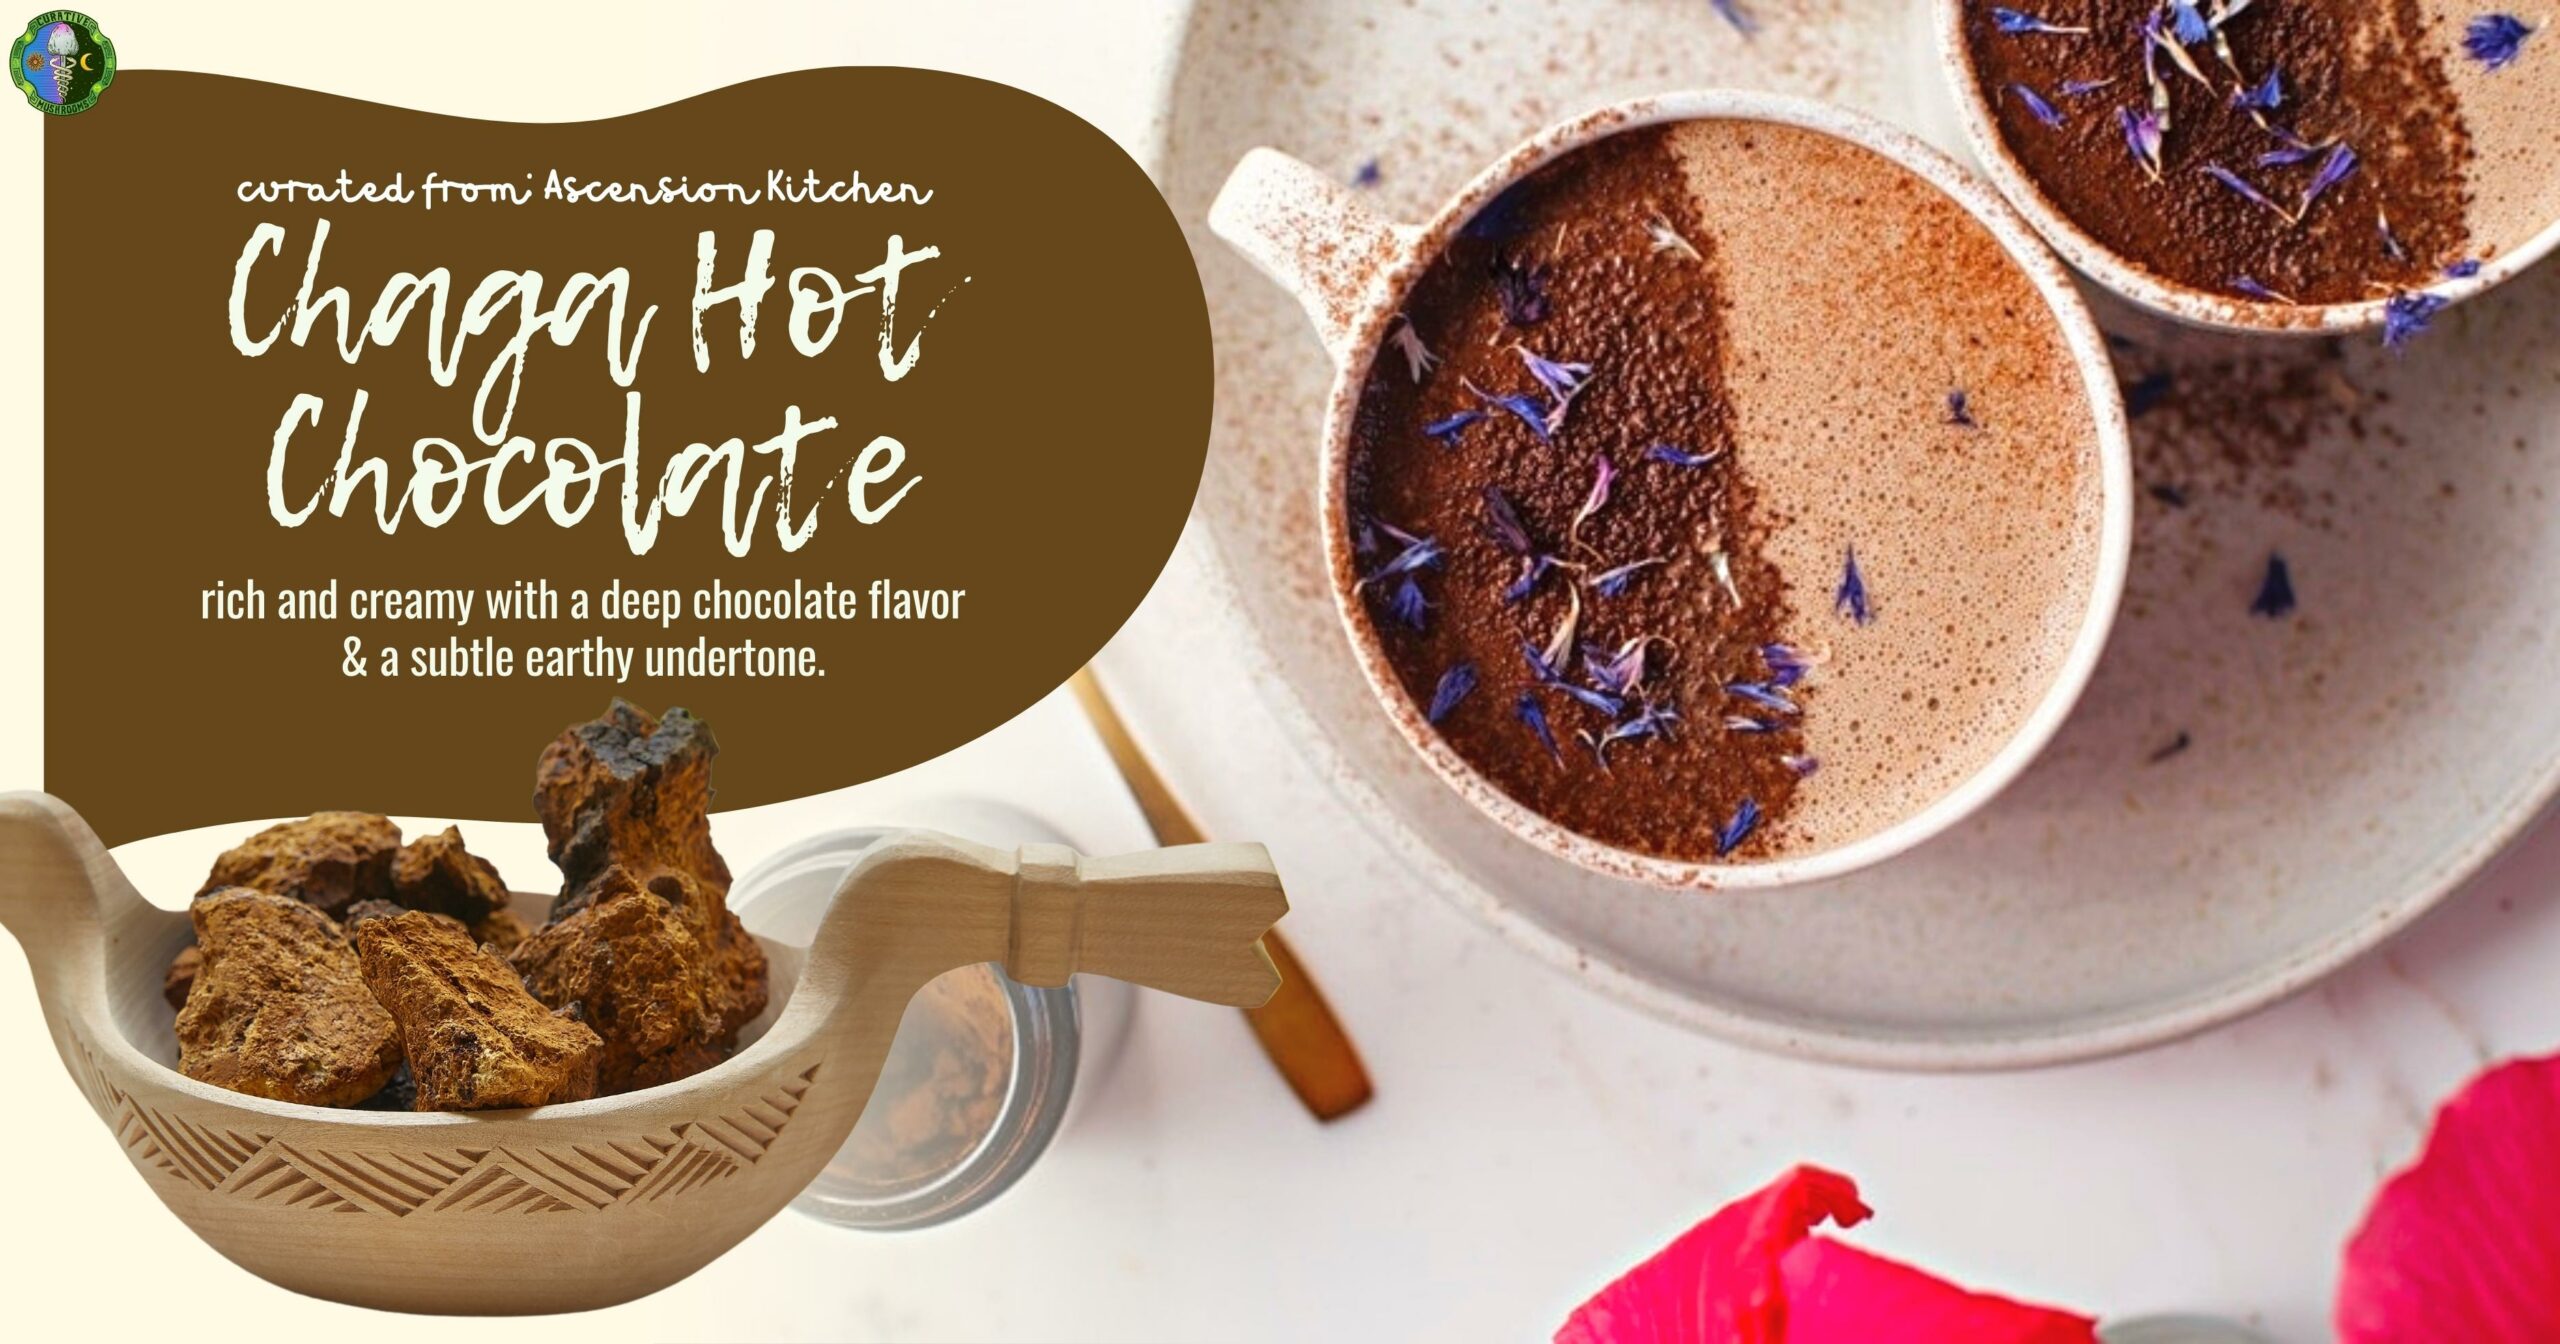 Chaga Hot Chocolate - rich and creamy with a deep chocolate flavor, a subtle earthy undertone